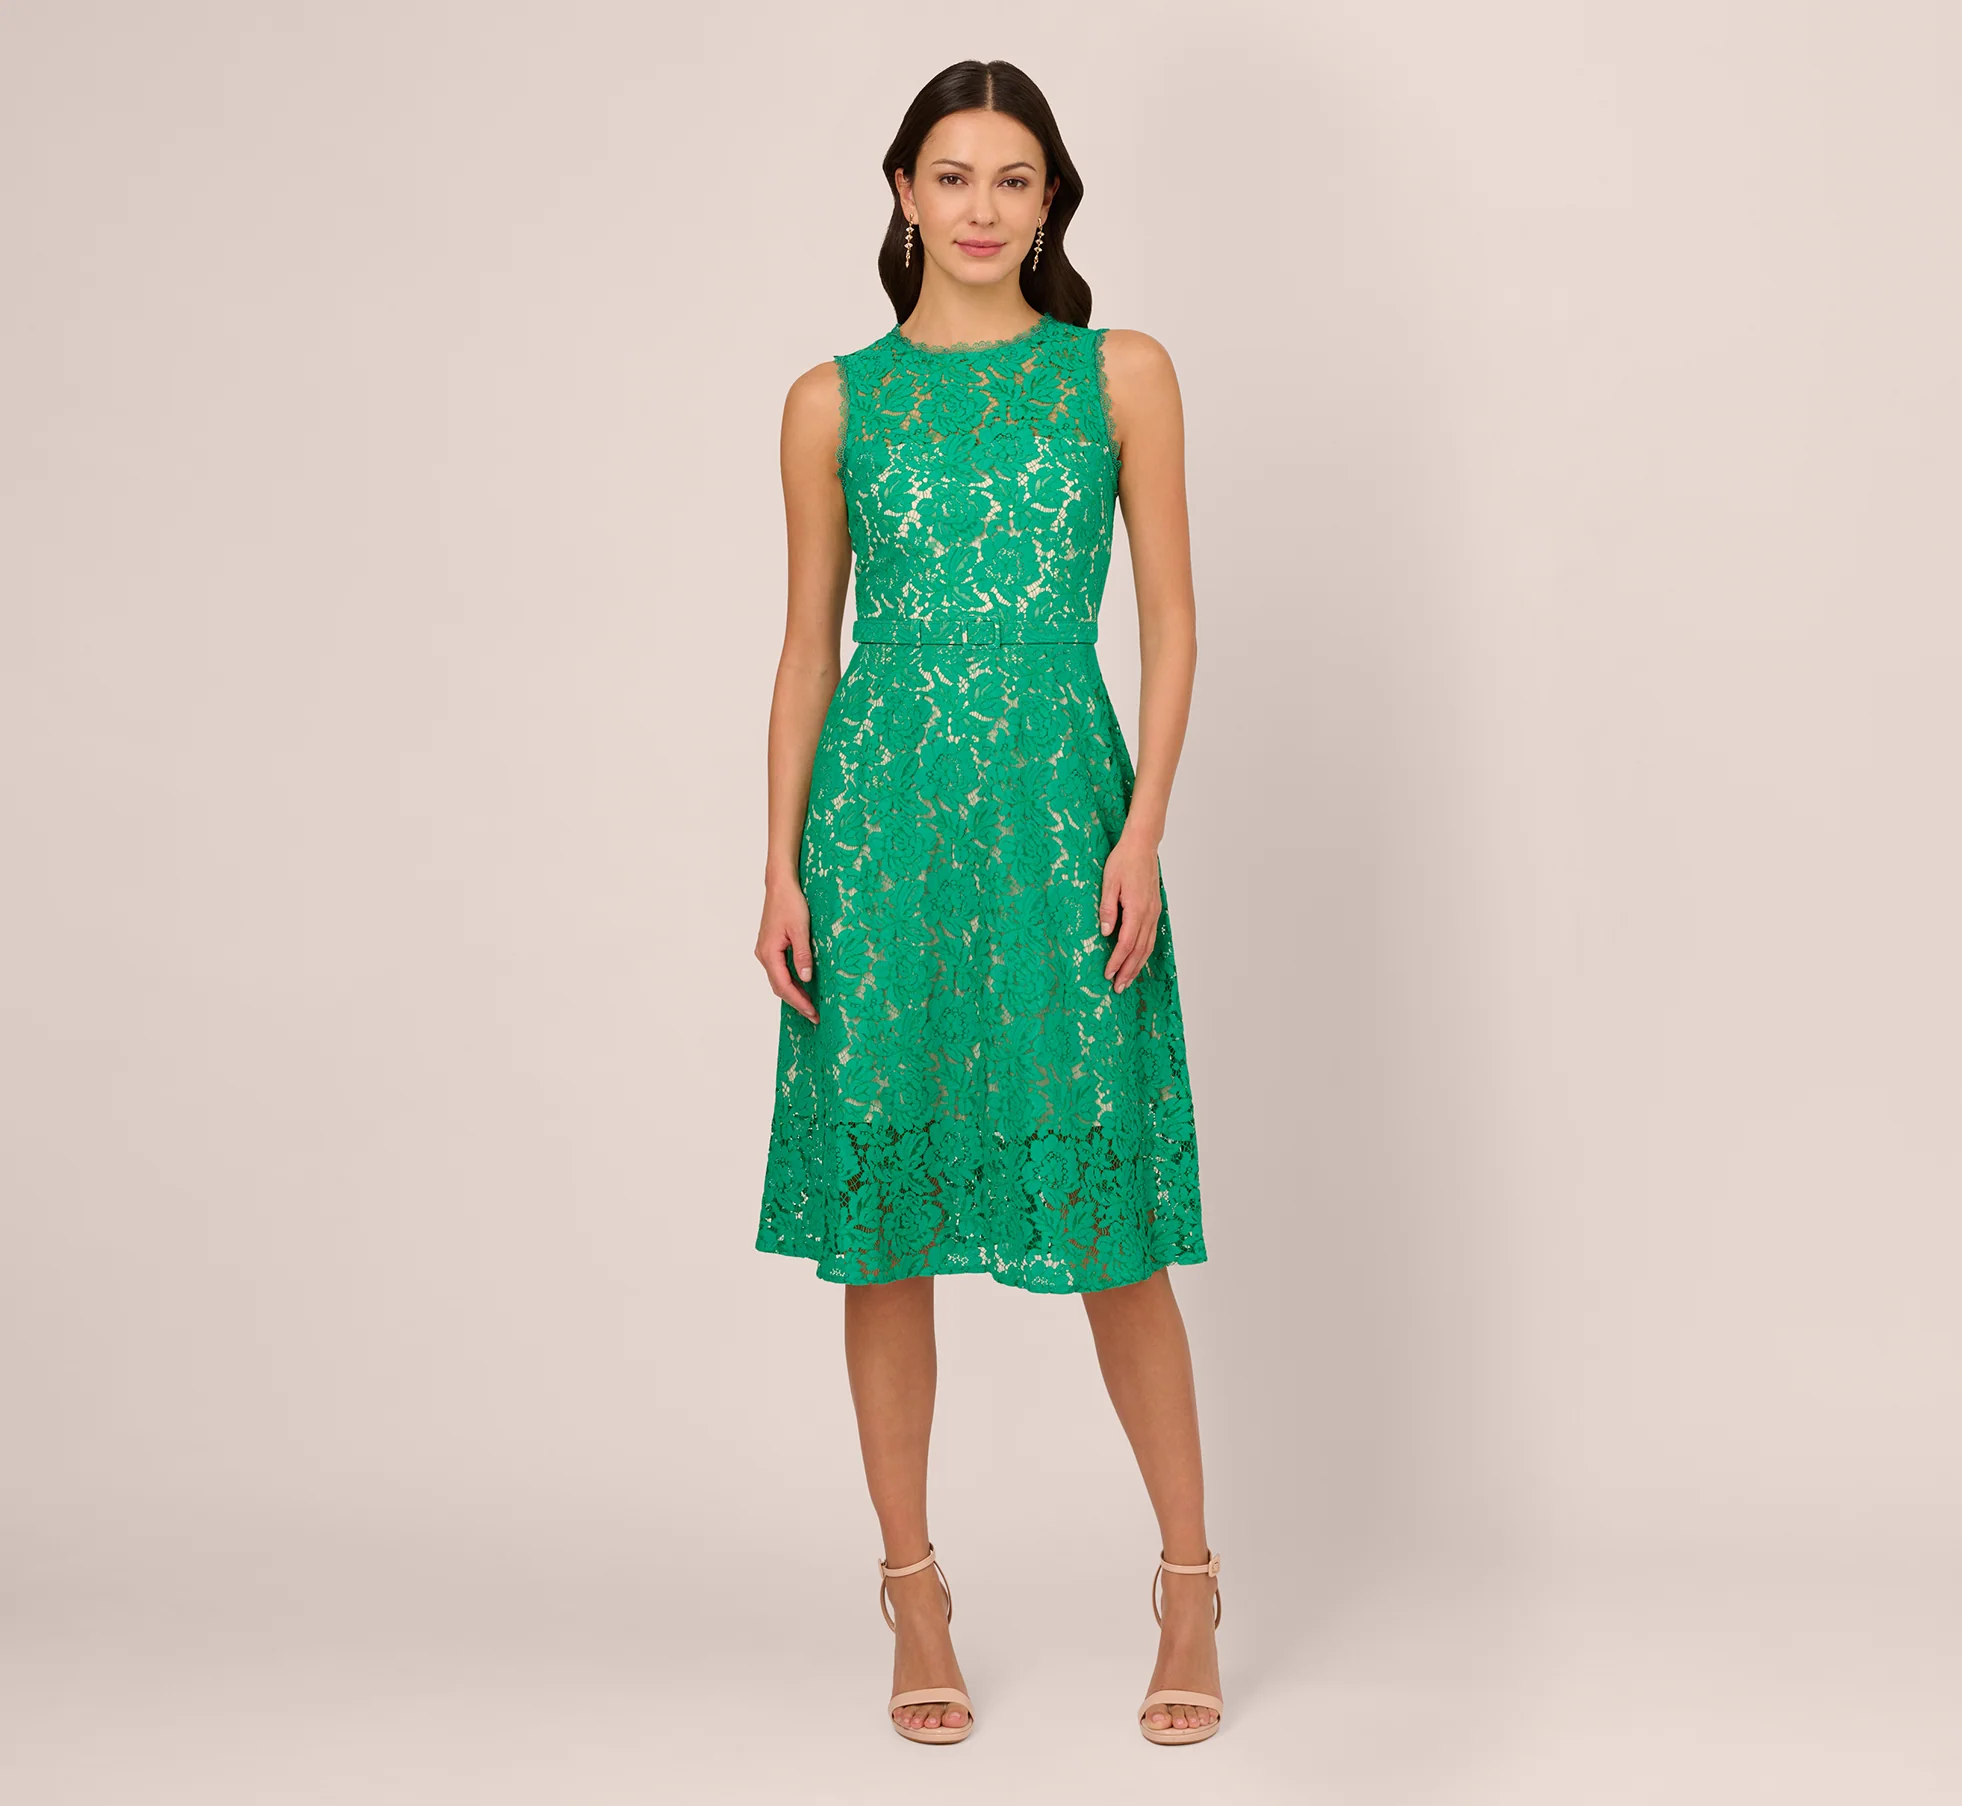 SLEEVELESS LACE FIT AND FLARE DRESS WITH SHEER DETAILS IN BOTANIC GREEN